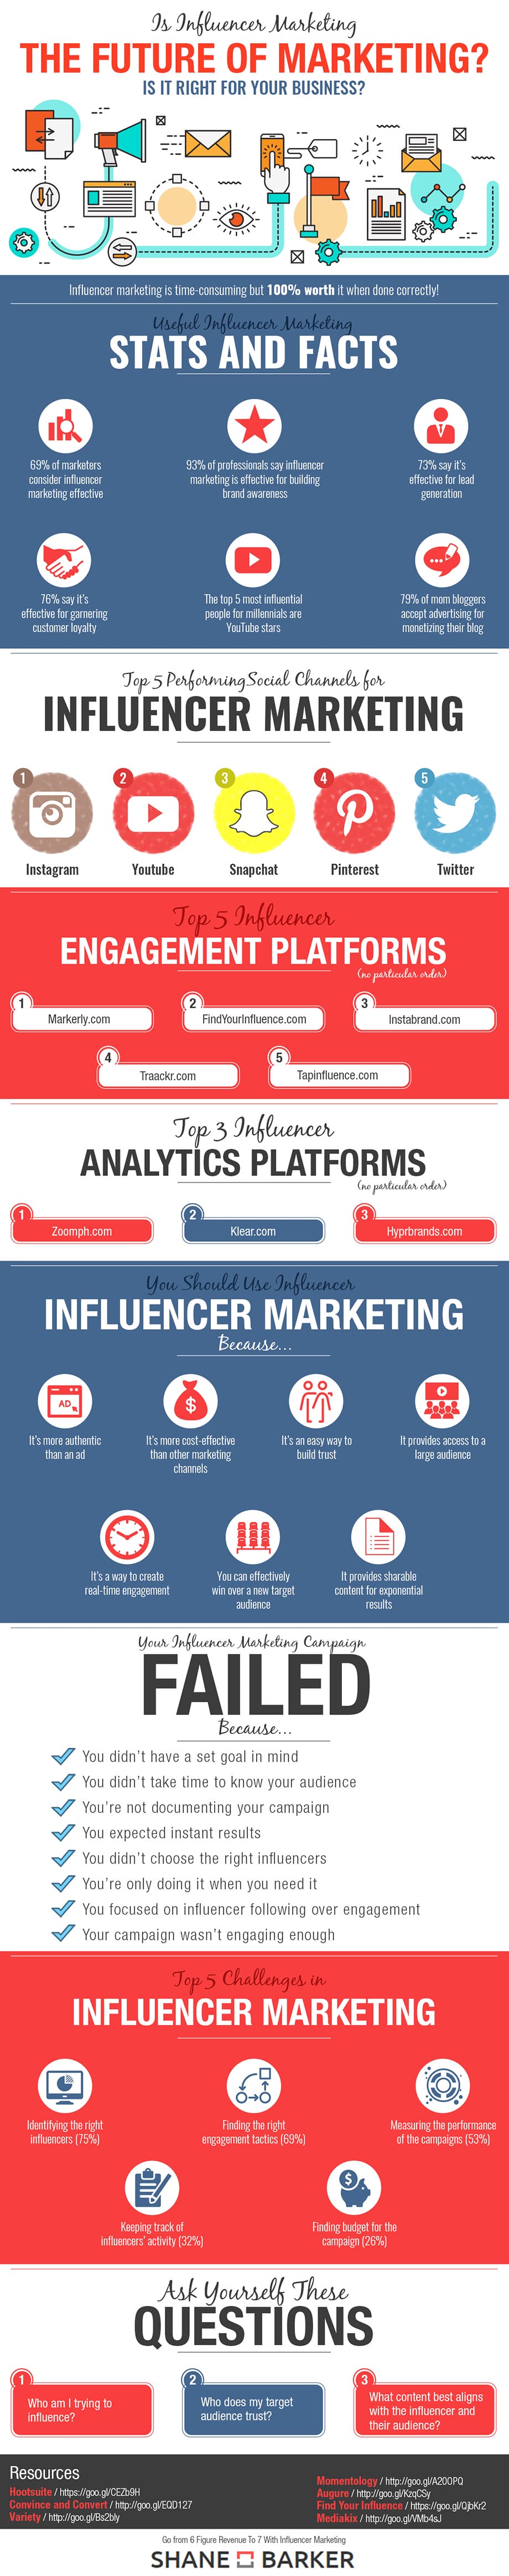 Is Influencer Marketing the Future of Marketing? (Infographic)